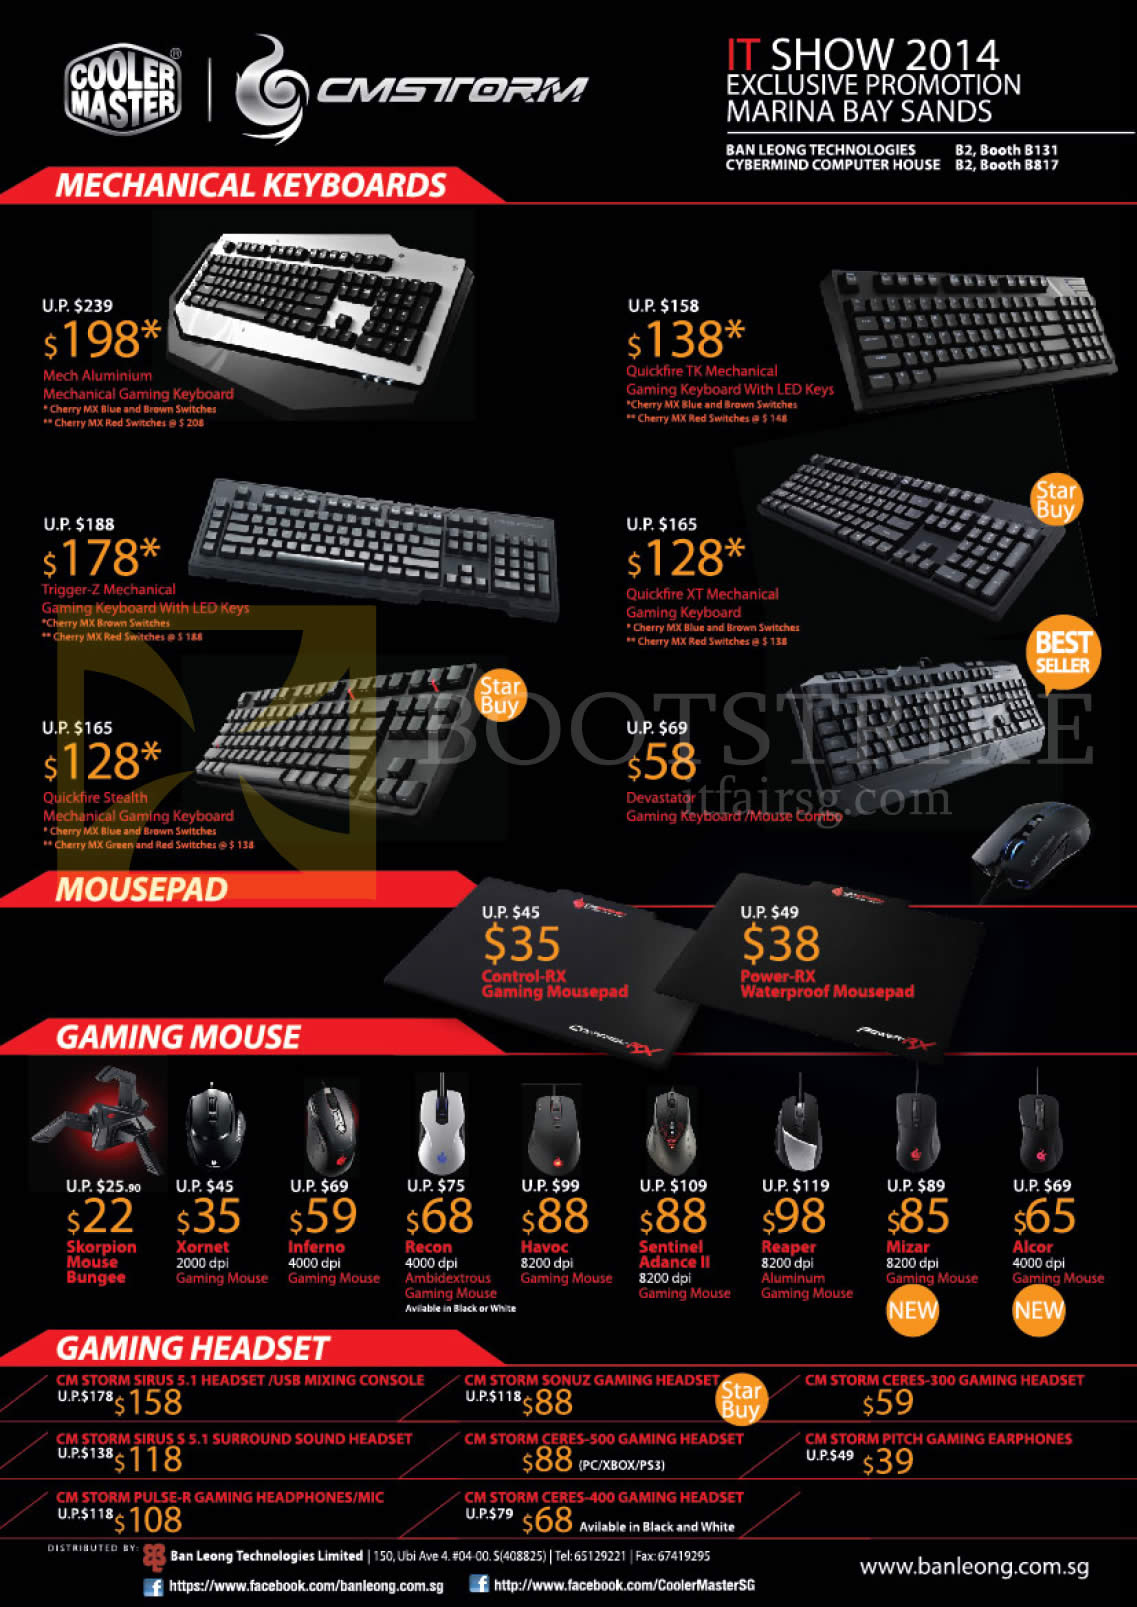 IT SHOW 2014 price list image brochure of Cooler Master CMStorm Mechanical Keyboards, Mousepads, Gaming Mouse, Headsets, Quickfire, Aluminum, Devastator, Xornet, Recon, Sirus